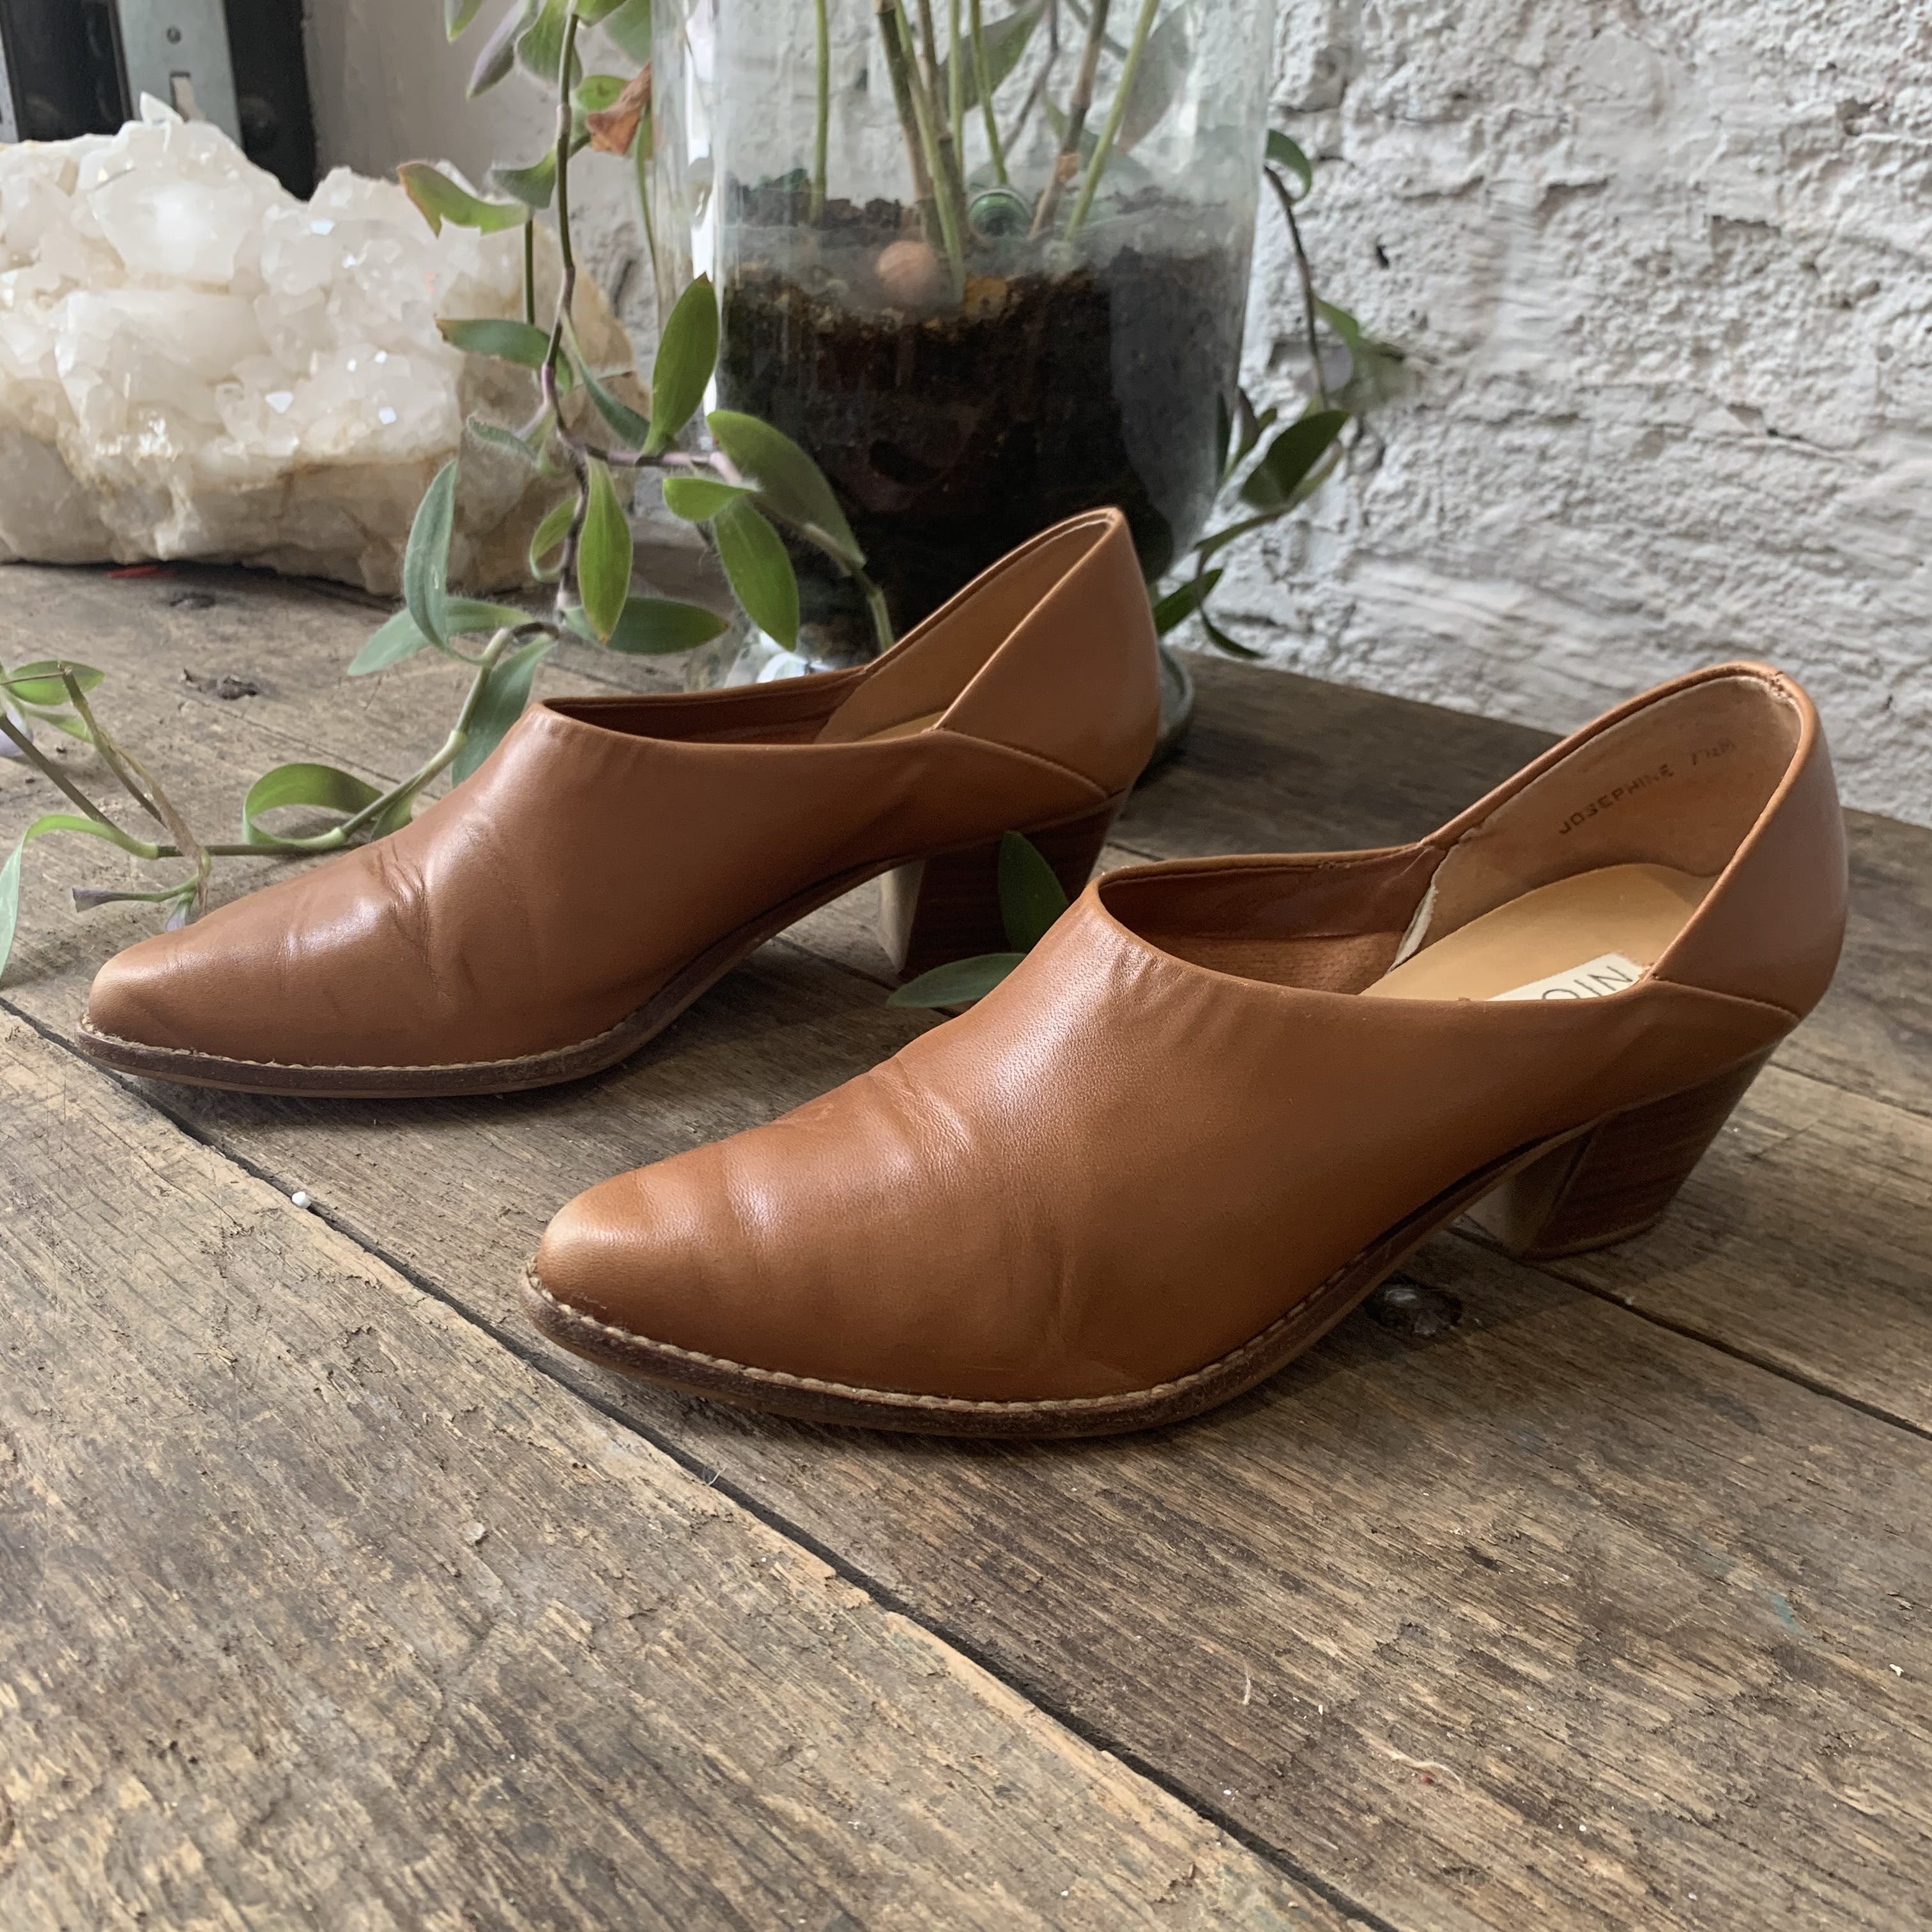 Vintage 90's Tan Leather Stacked Heel Booties by Nicole | Shop THRILLING